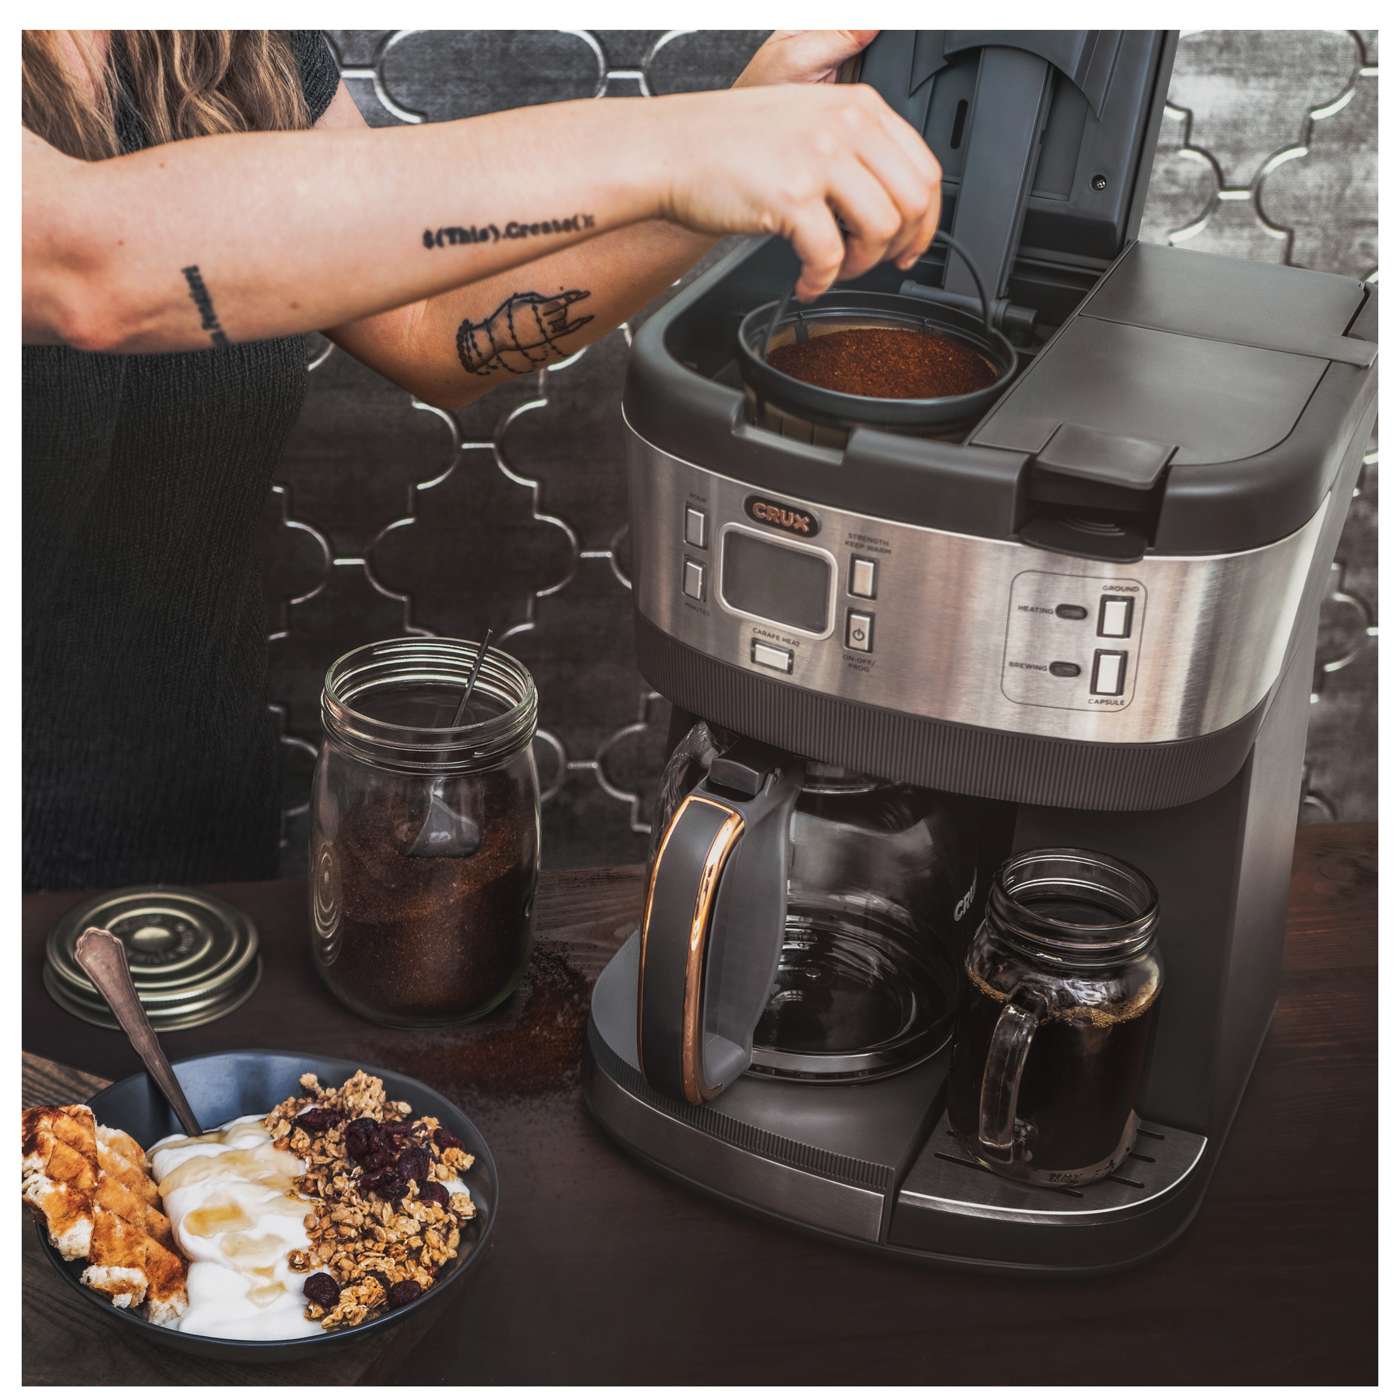 Crux Combination Coffee Machine with Self Cleaning Option